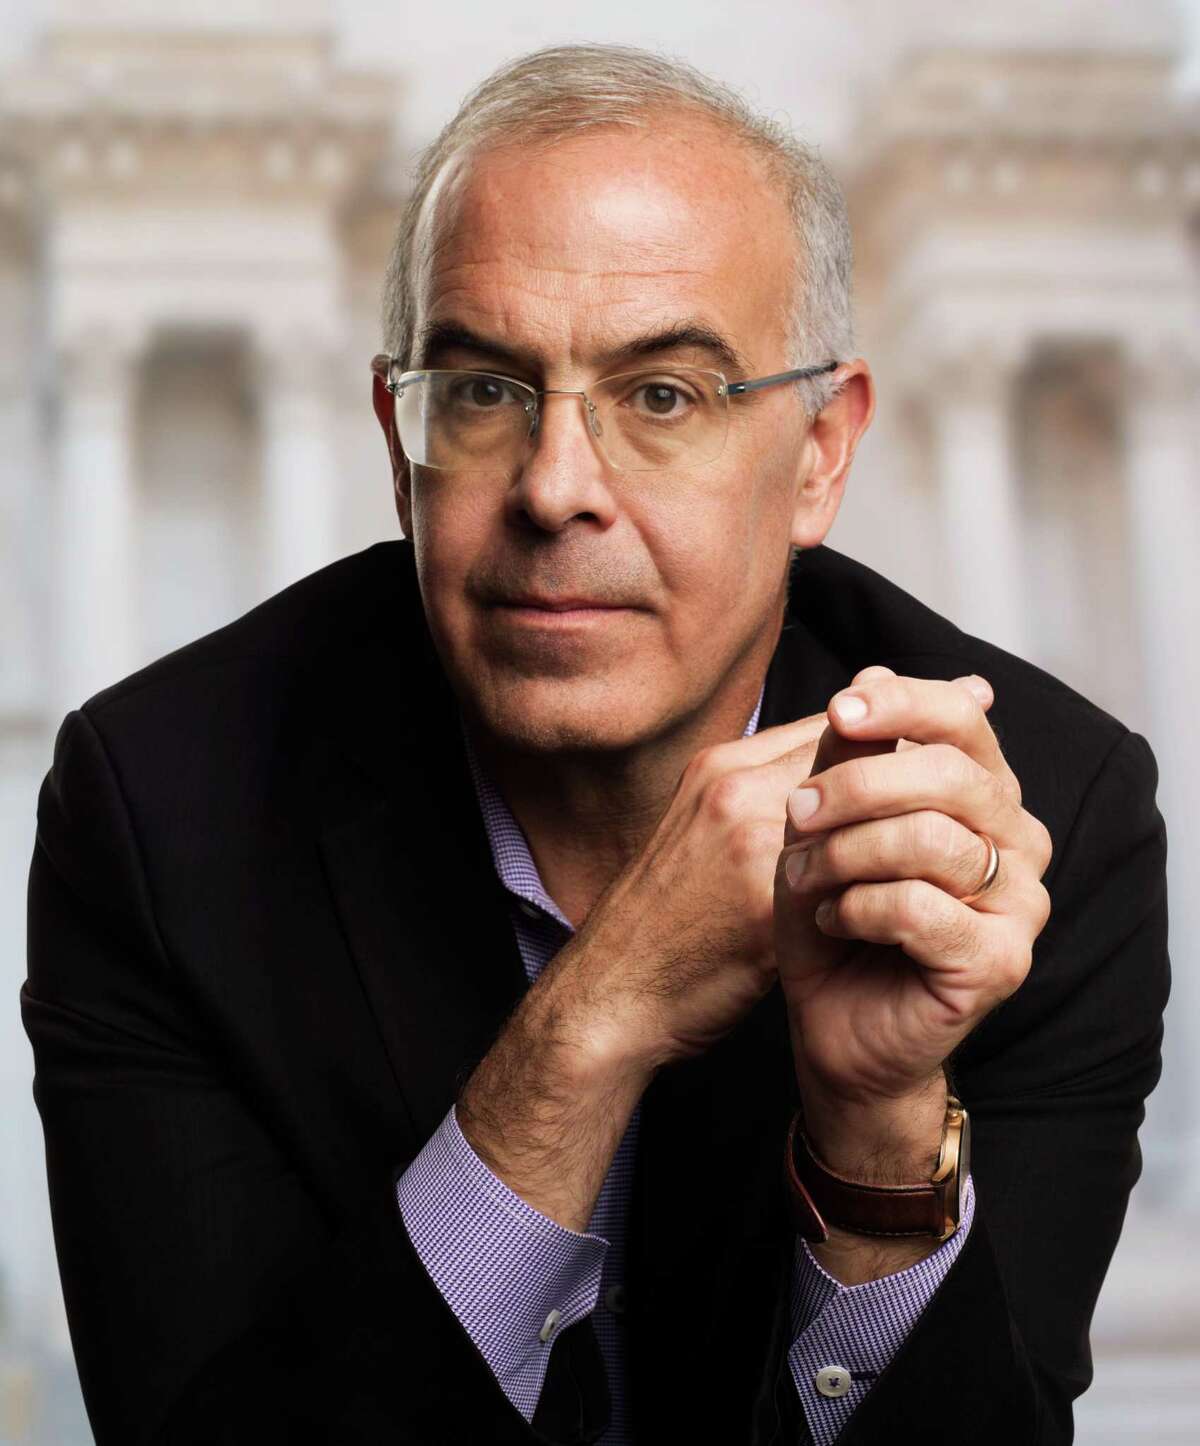 Writer and commentator David Brooks will discuss his latest book, “The Second Mountain: The Quest for a Moral Life,” as part of WSHU Public Radio’s “Join the Conversation” author series at Sacred Heart University in Fairfield on July 30.